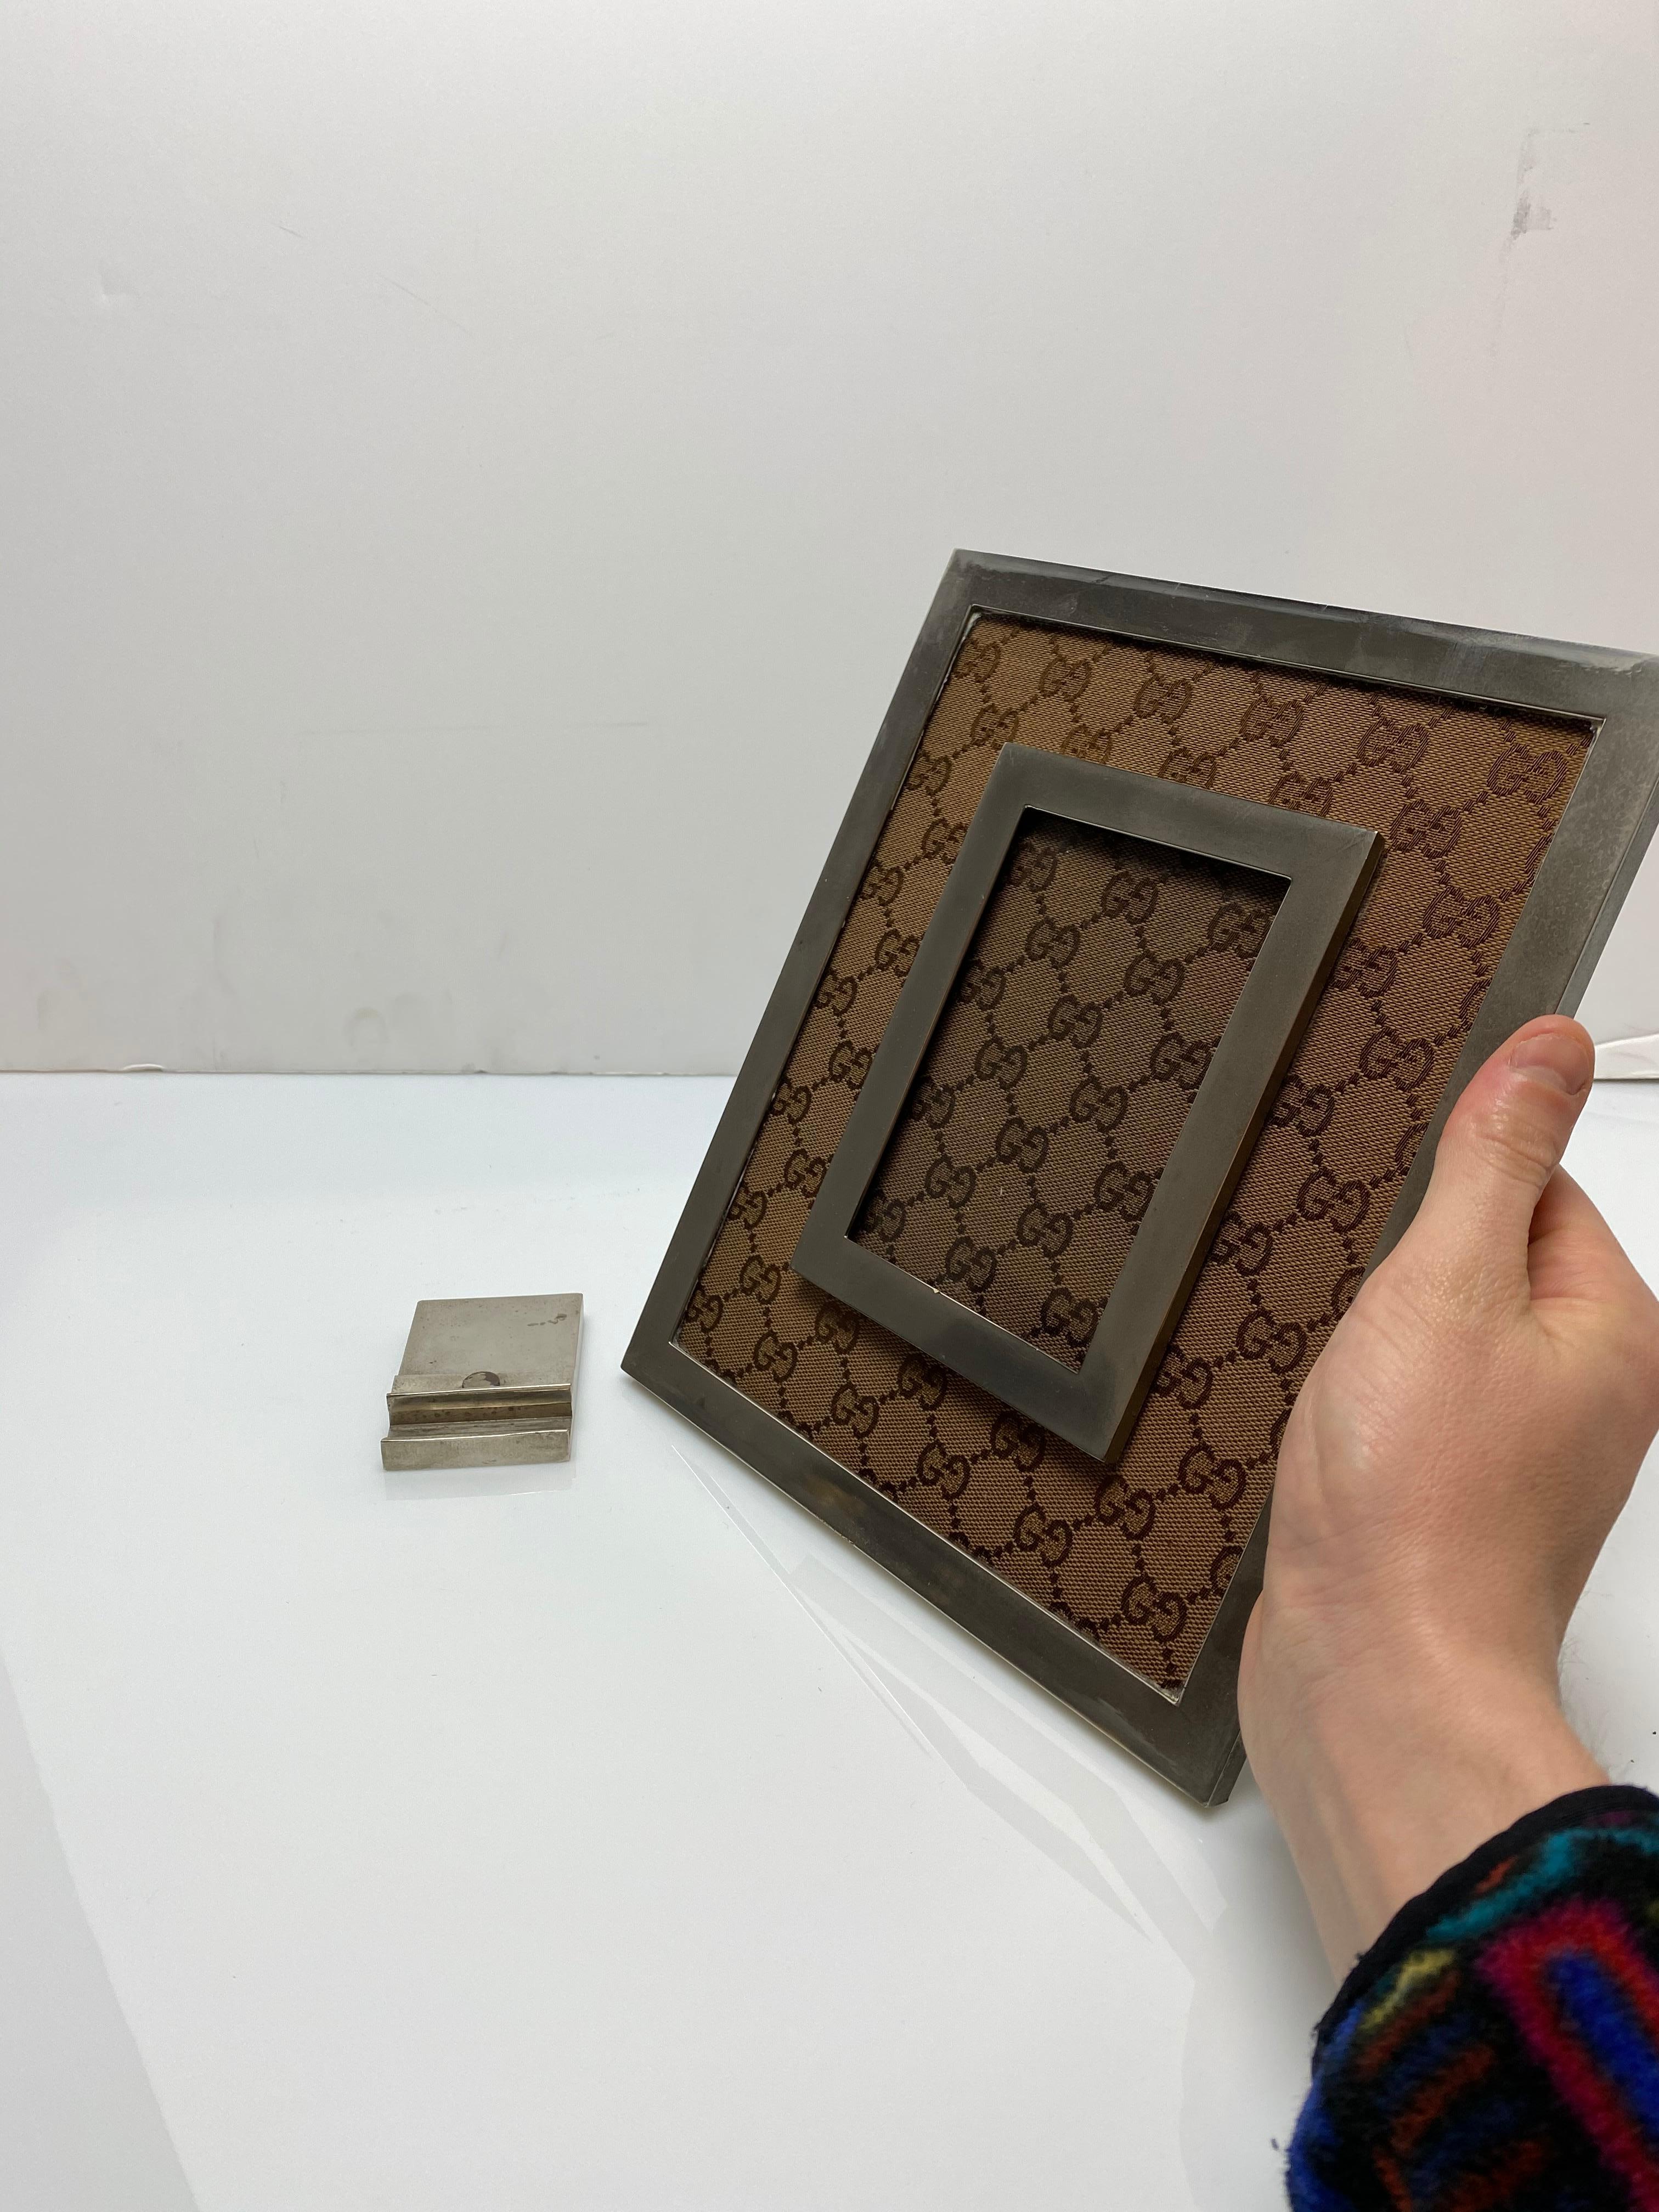 A Classic and iconic picture frame from Gucci. Featuring their monogram canvas as a mat for the picture. It is marked Gucci on the base of the stand. The frame itself can be lifted off the Stand to appreciate in the hand as well.

Fits a 3